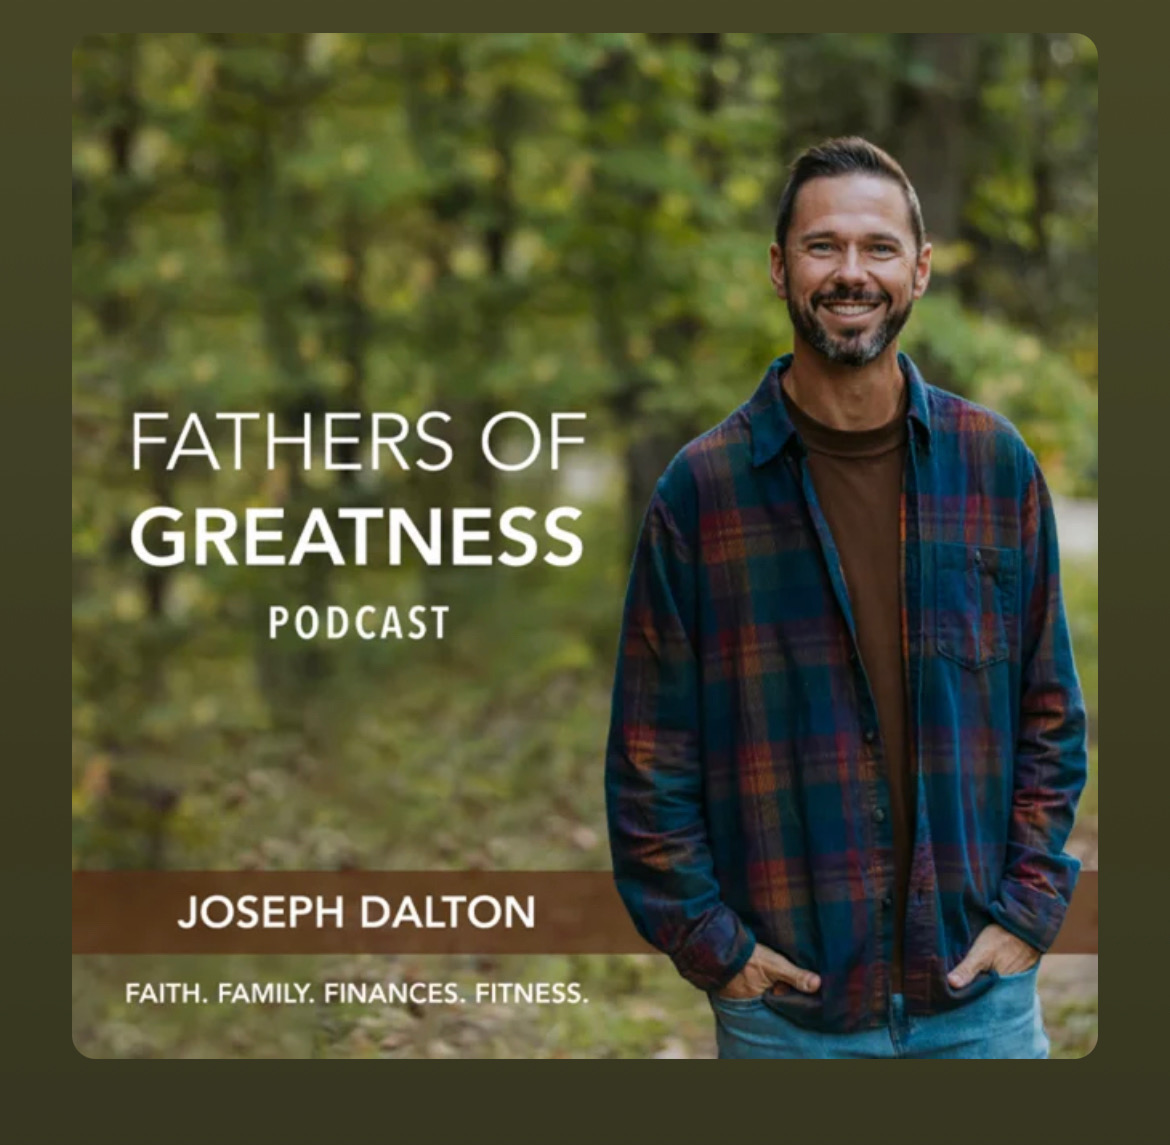 Fathers of Greatness Podcast by Joseph Dalton